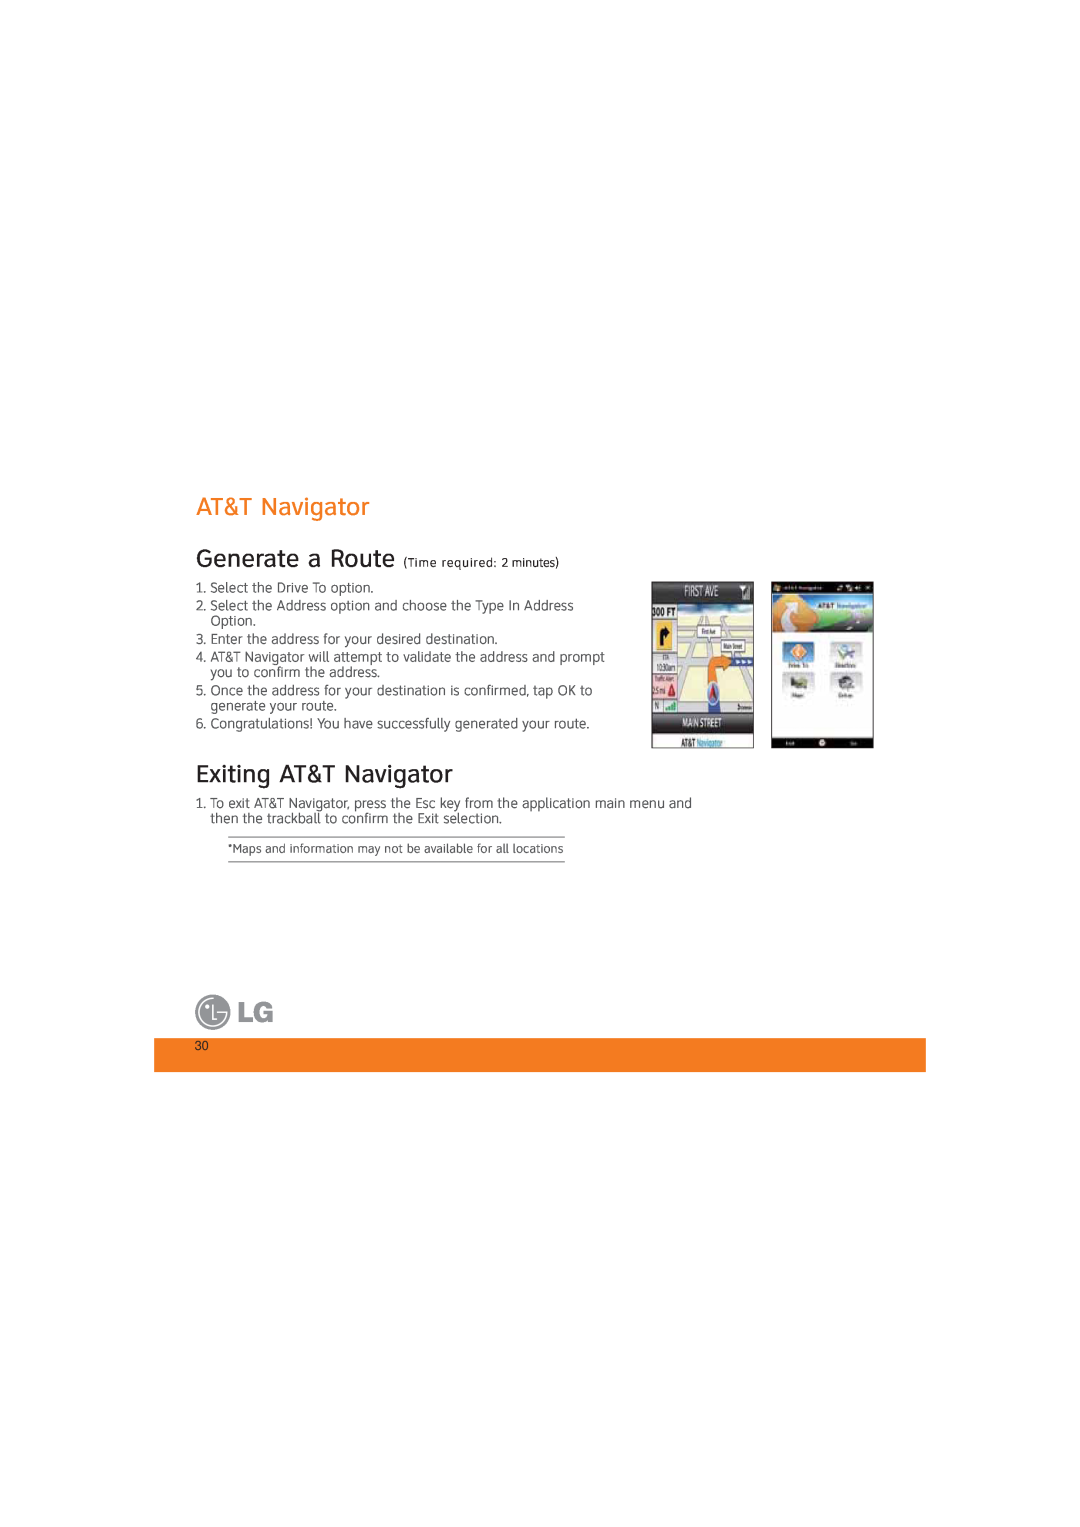 LG Electronics MCD0009405 specifications Exiting AT&T Navigator 